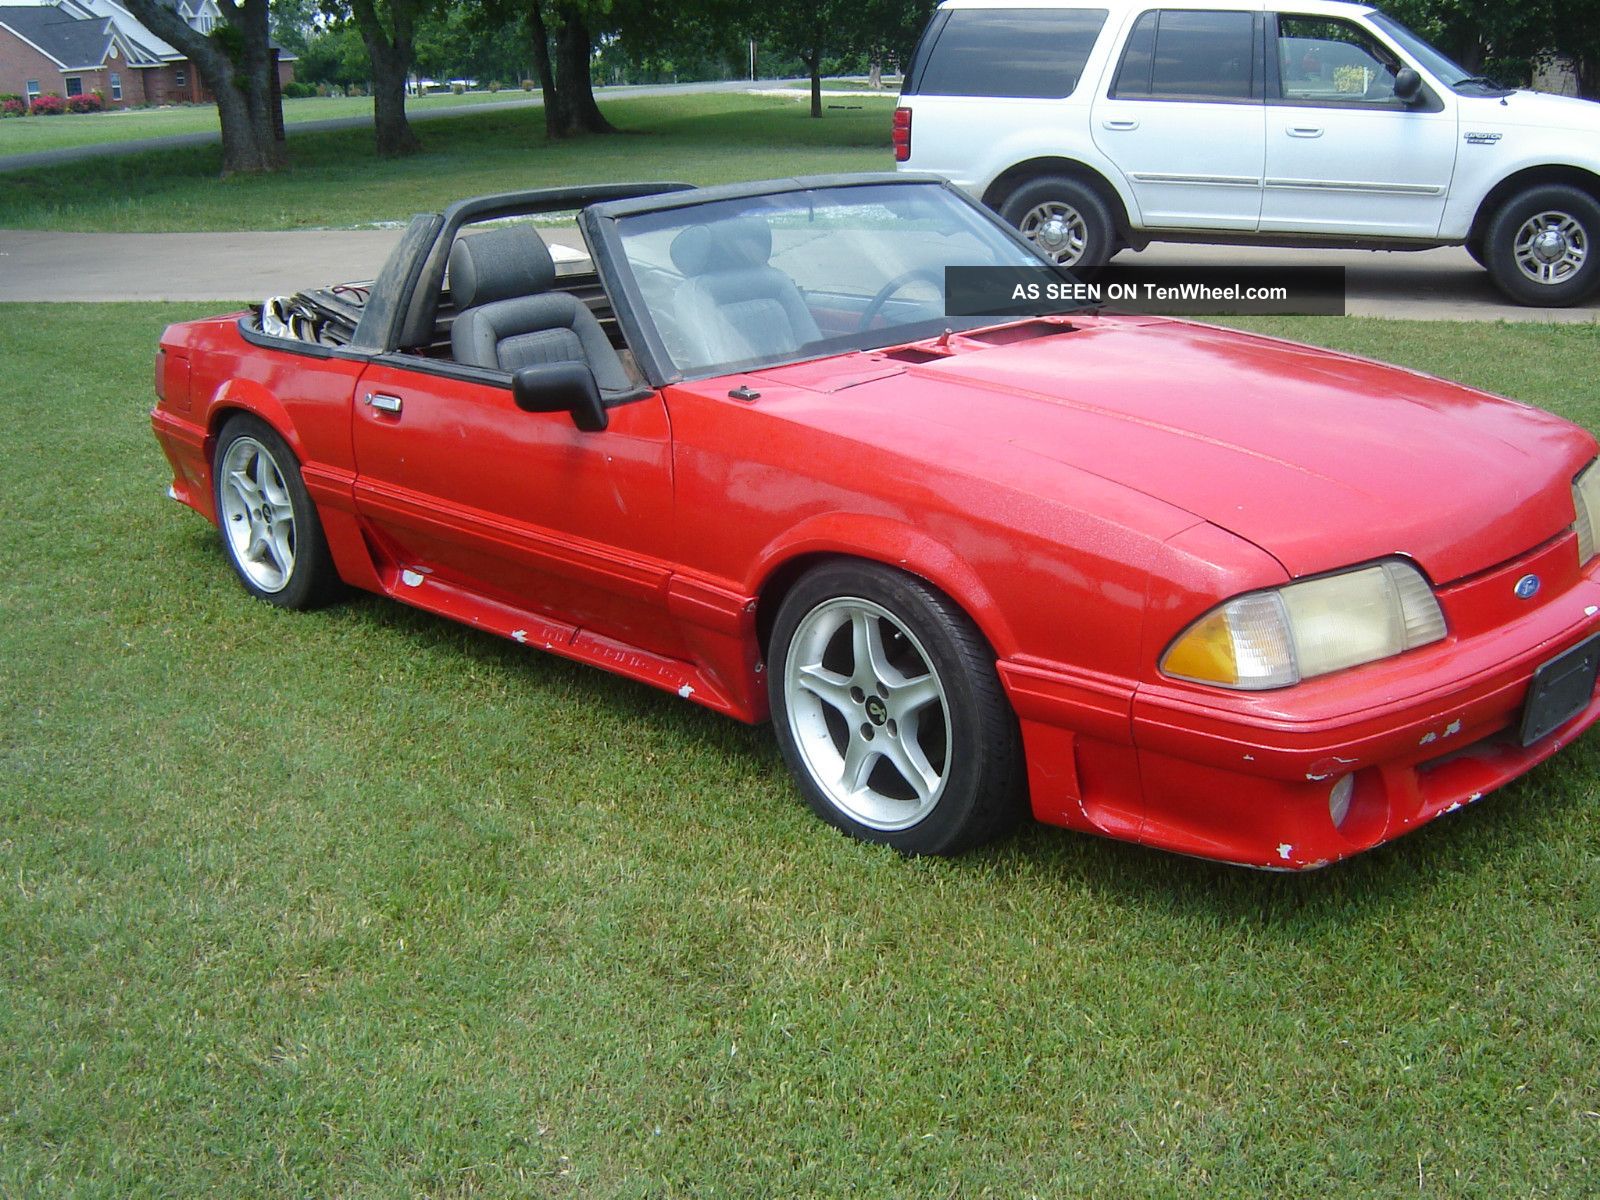 Ford Mustang For Sale - Ford Mustang Classifieds - Classic ...